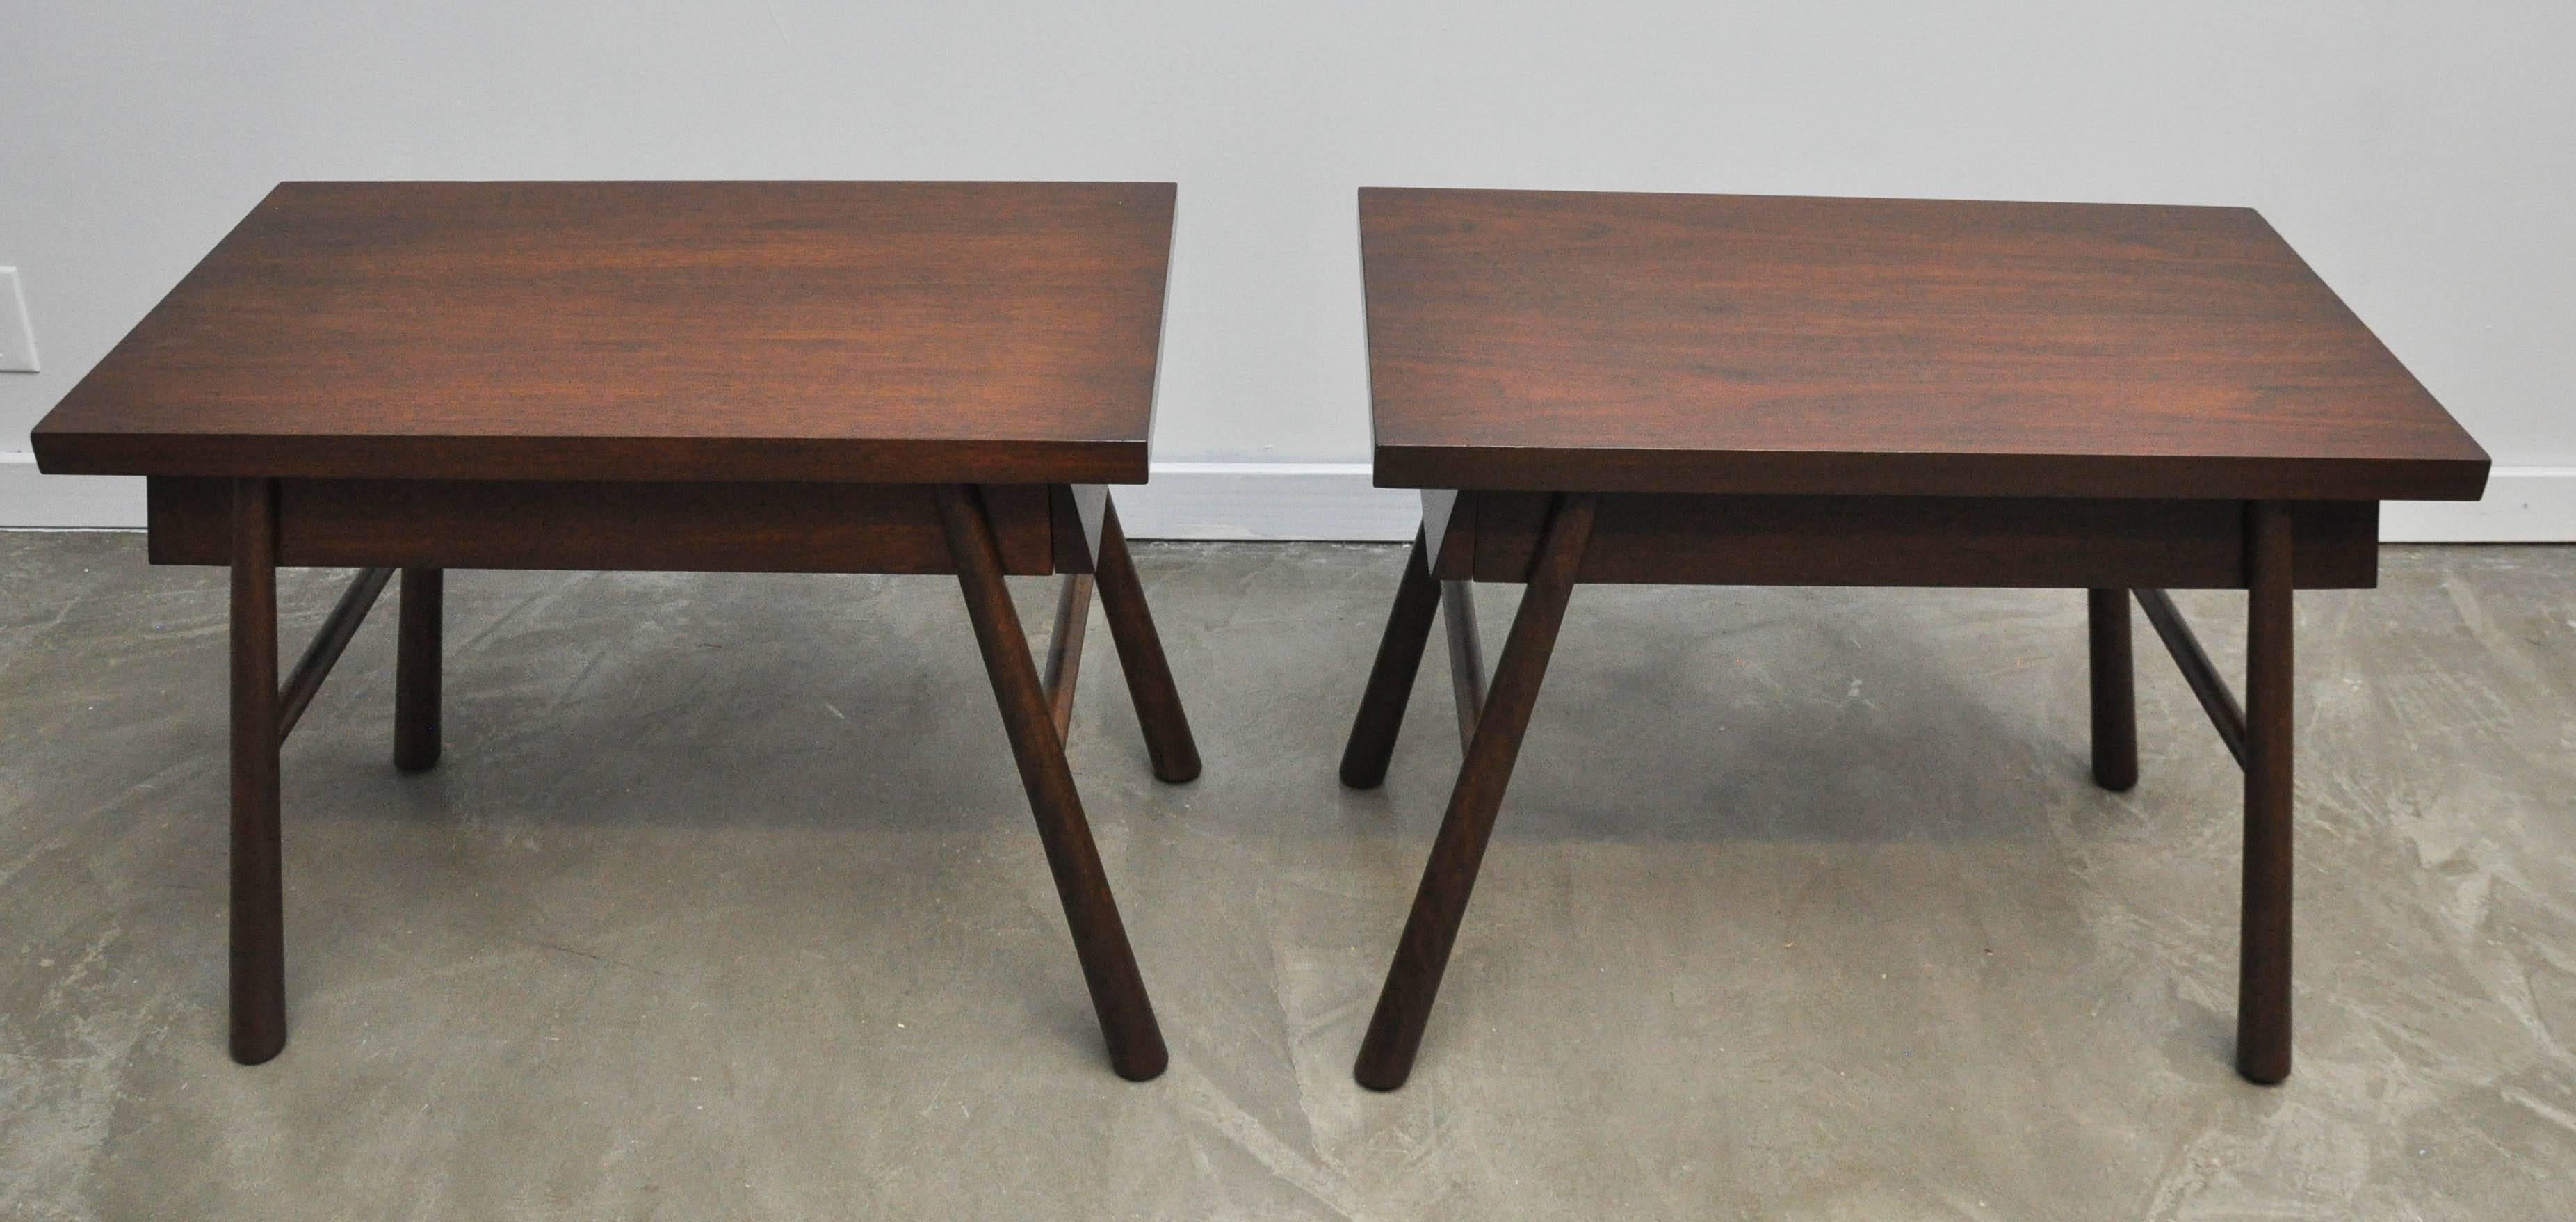 Pair of nightstand or end tables by T.H. Robsjohn-Gibbings. Fully restored and refinished in card walnut tone.